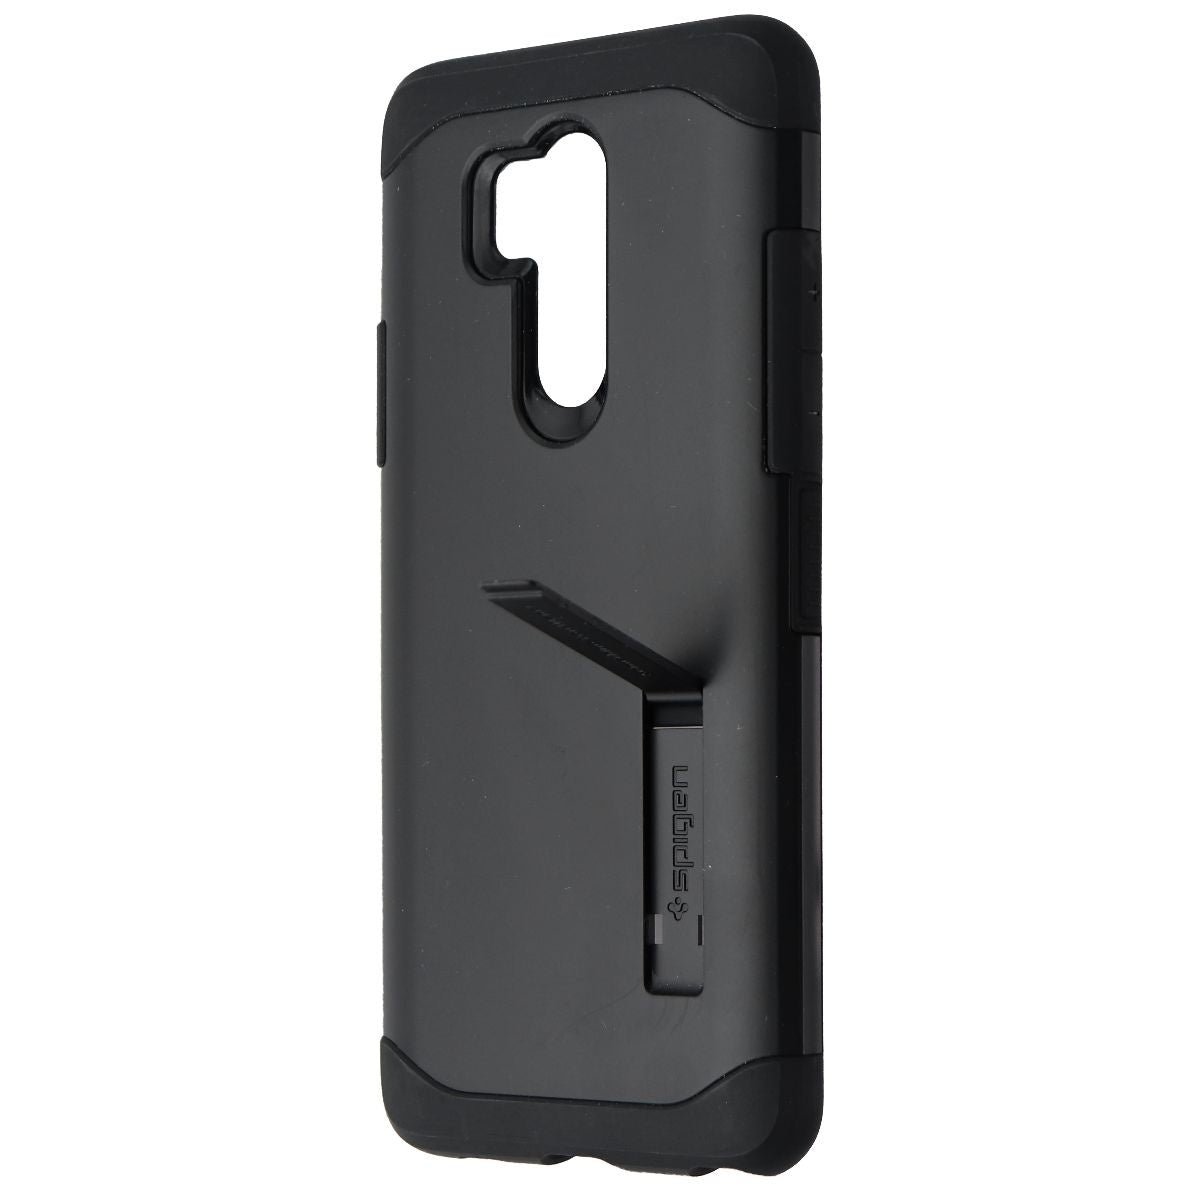 Spigen Slim Armor Case with Kickstand for LG G7 ThinQ - Black Cell Phone - Cases, Covers & Skins Spigen    - Simple Cell Bulk Wholesale Pricing - USA Seller